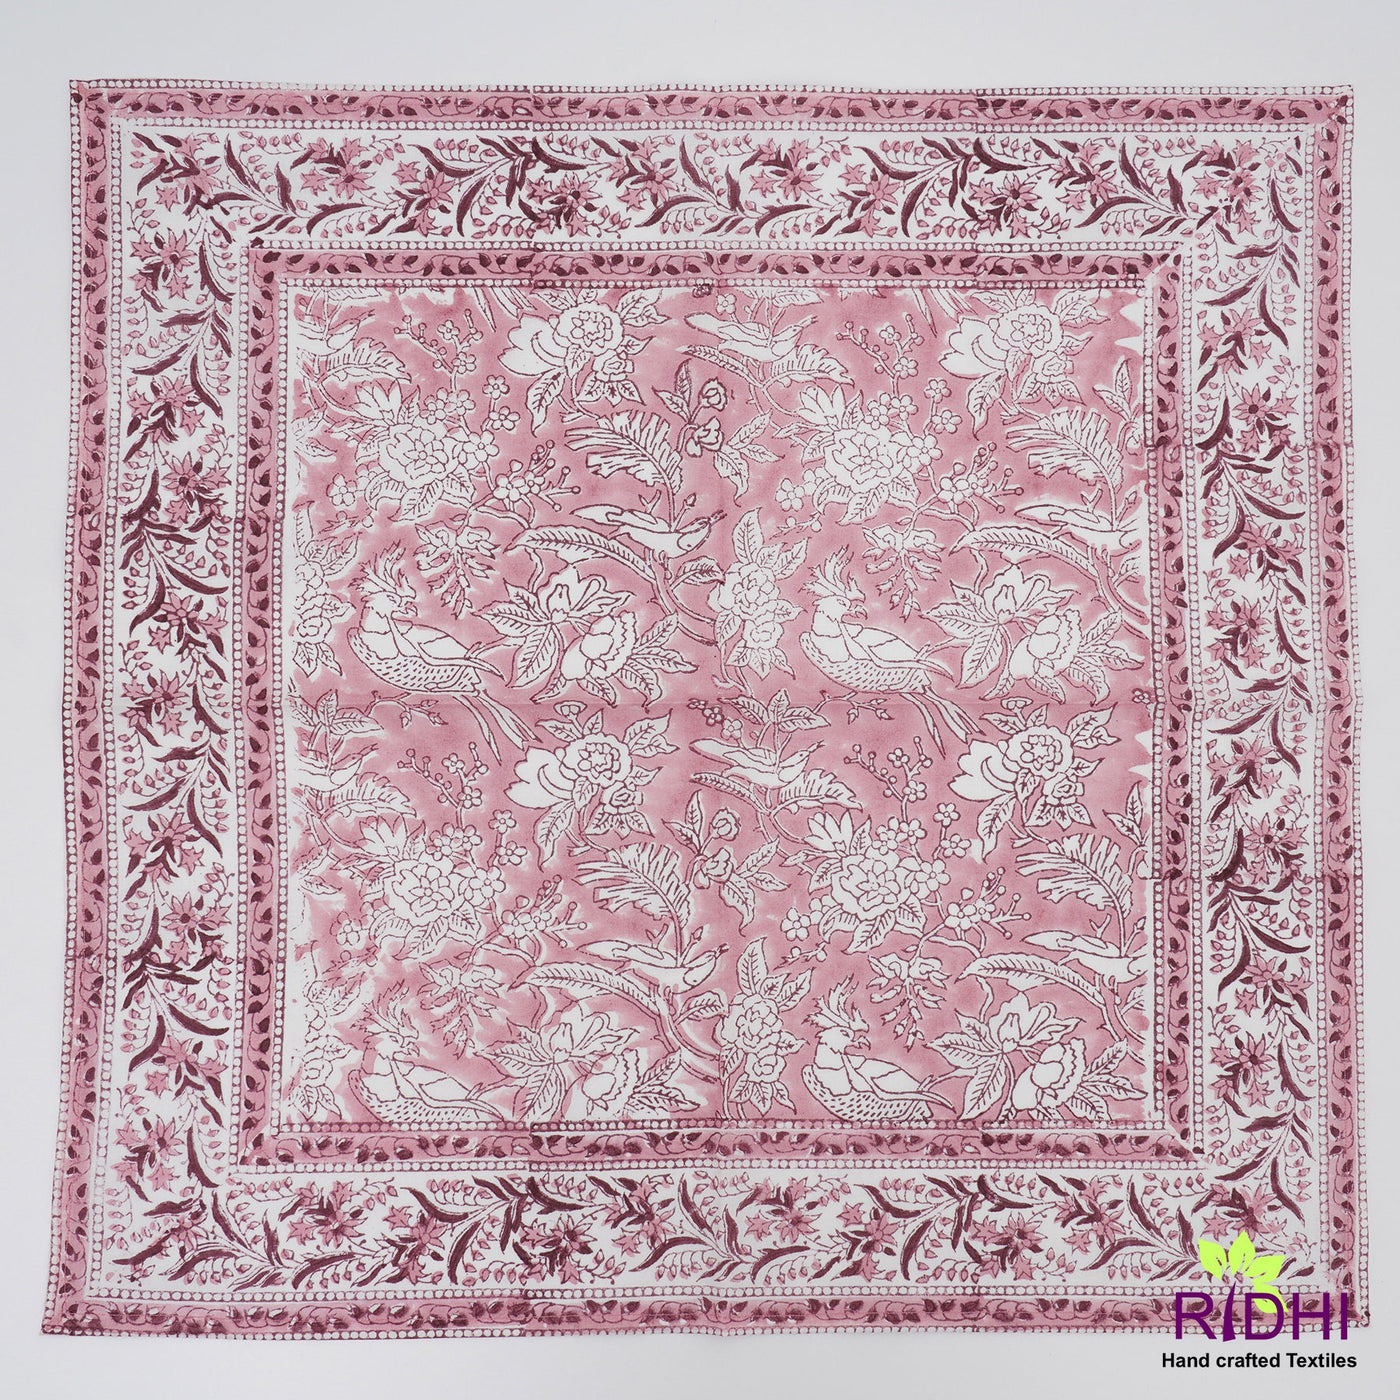 Solid Pink and White Indian Hand Block Floral Printed 100% Pure Cotton Cloth Dinner Napkins, Set of 4,6,12,24,48, size-20x20", Gift for Her